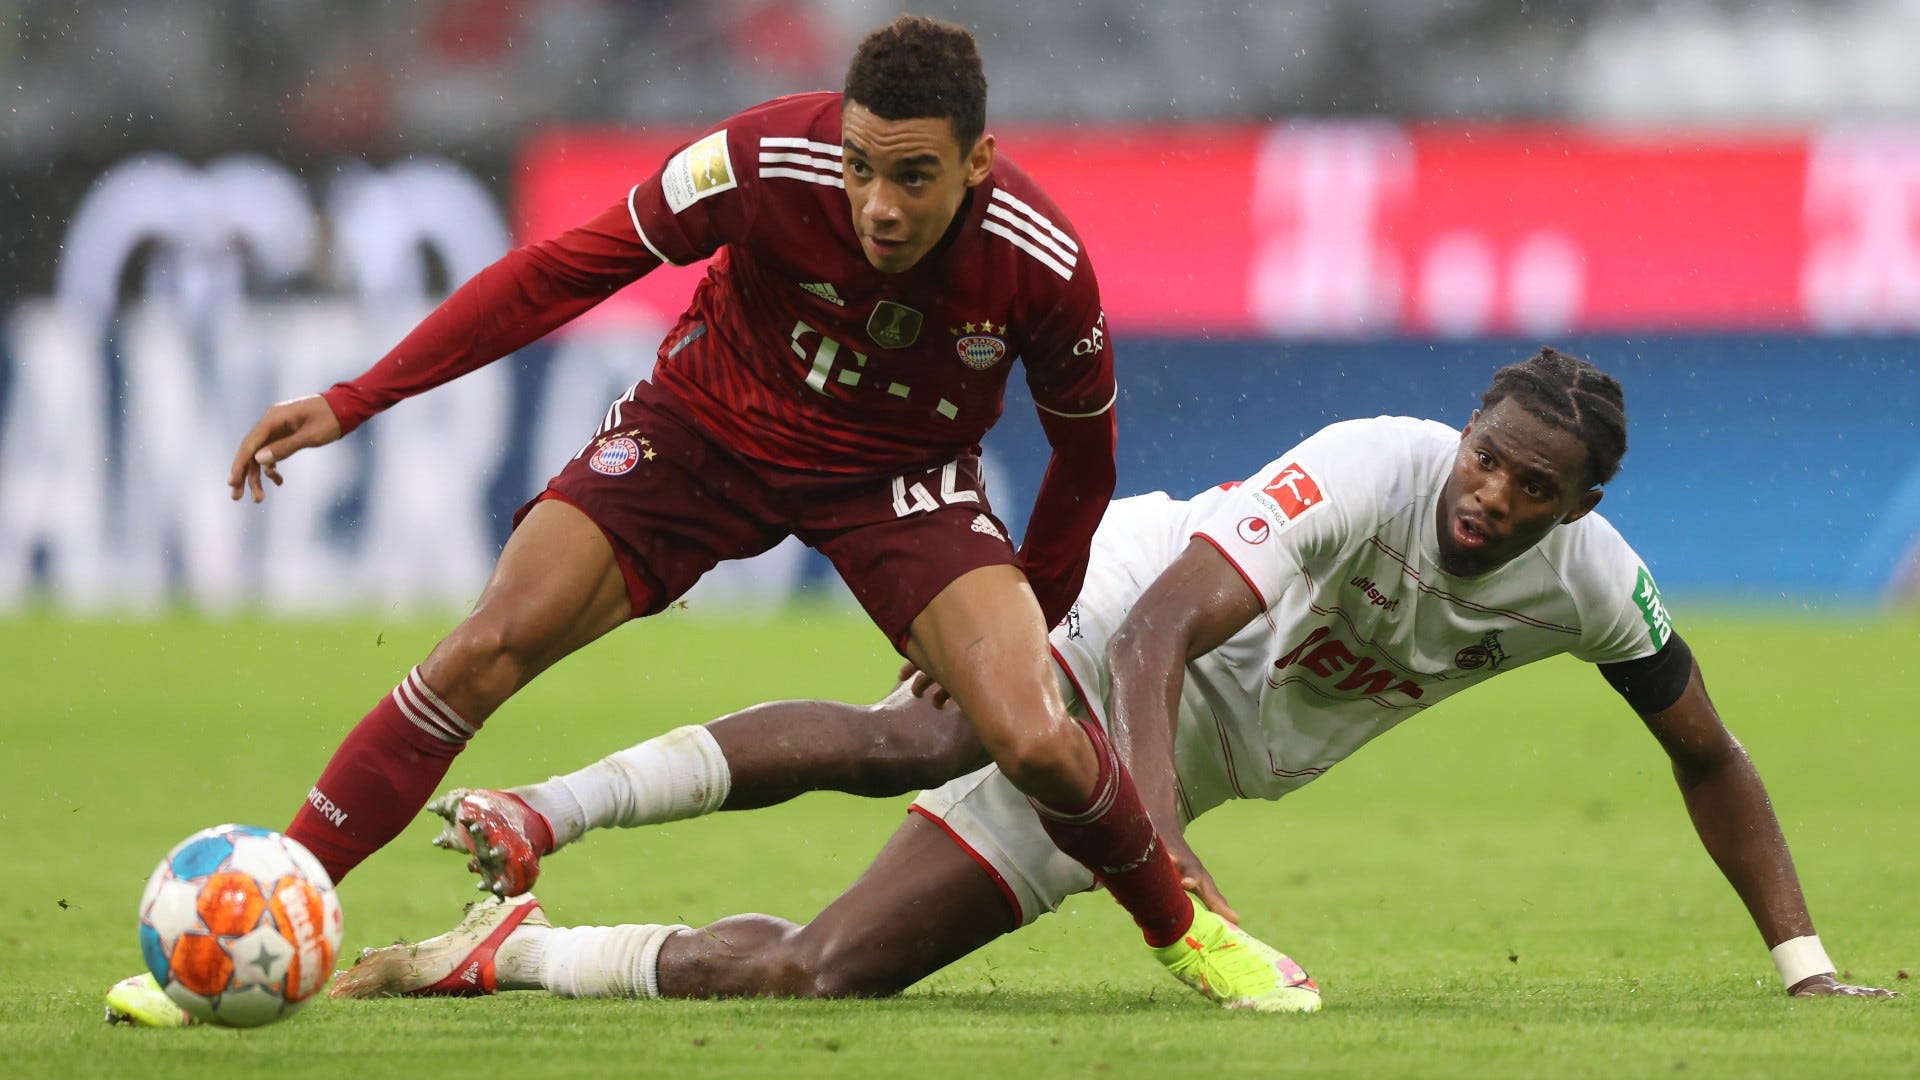 Musiala plays as if he has a magnet on his foot' - Bayern Munich starlet working on faults with athletics coach | Goal.com UK